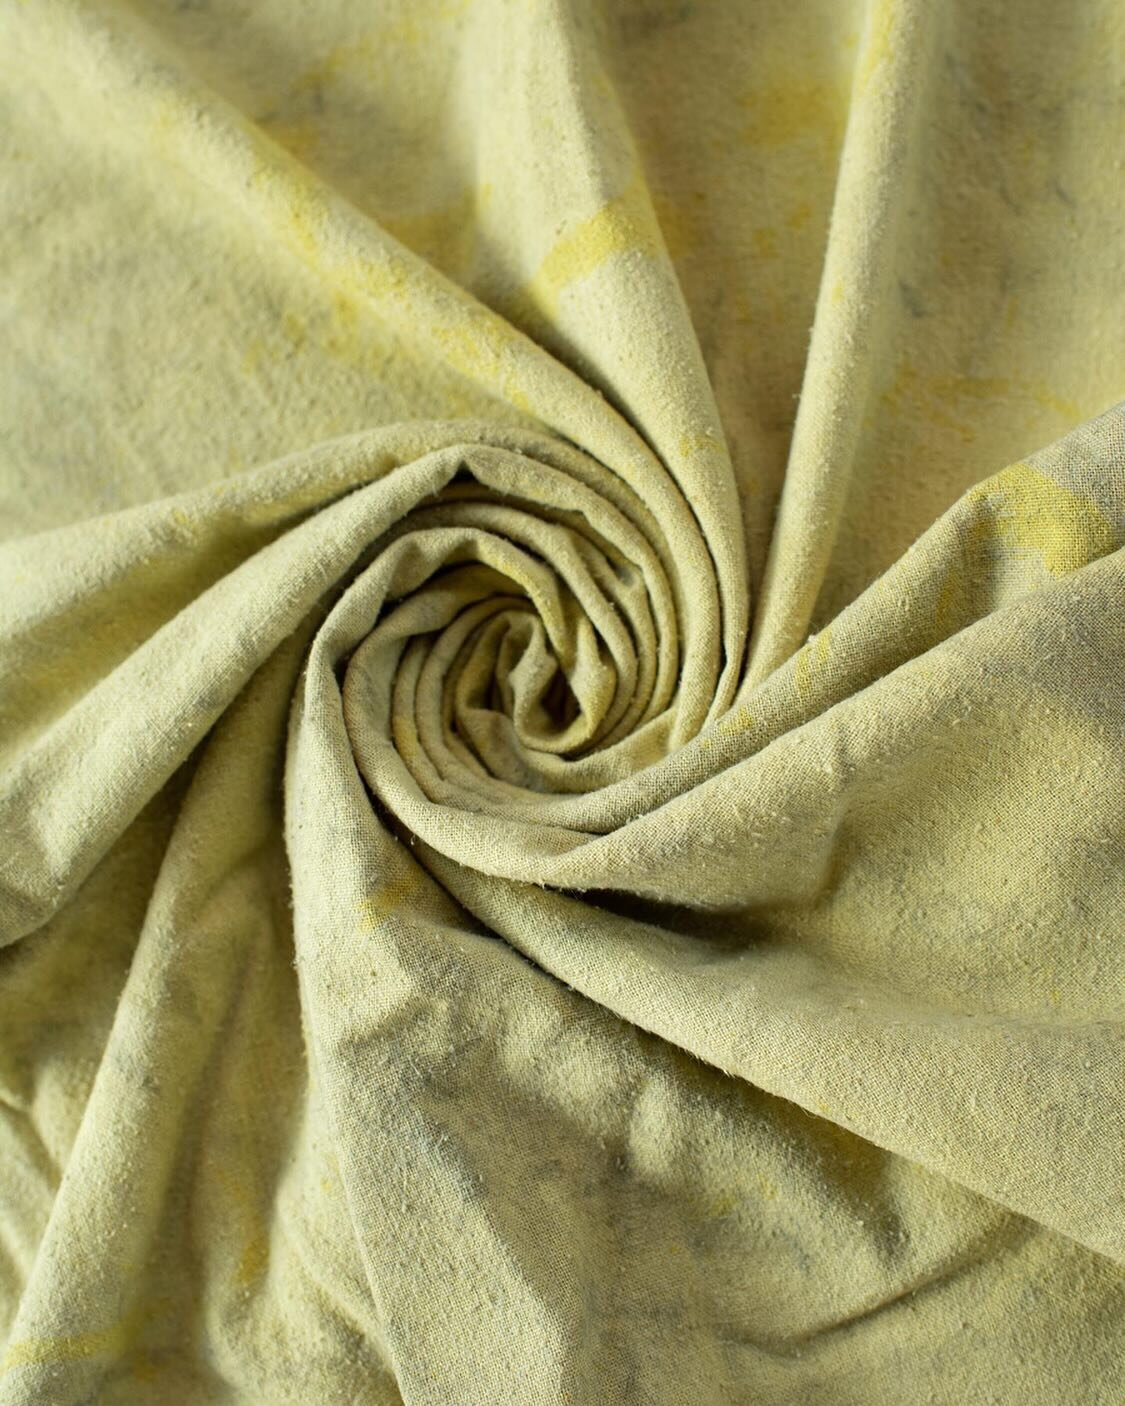 I&rsquo;m teaching Natural Dyes 101 at @valleyartcenter on Saturday, April 13th. If you are interested in learning natural dye basics on fabric this is for you!! We will be exploring the soy milk and alum mordant processes, creating dye baths, using 